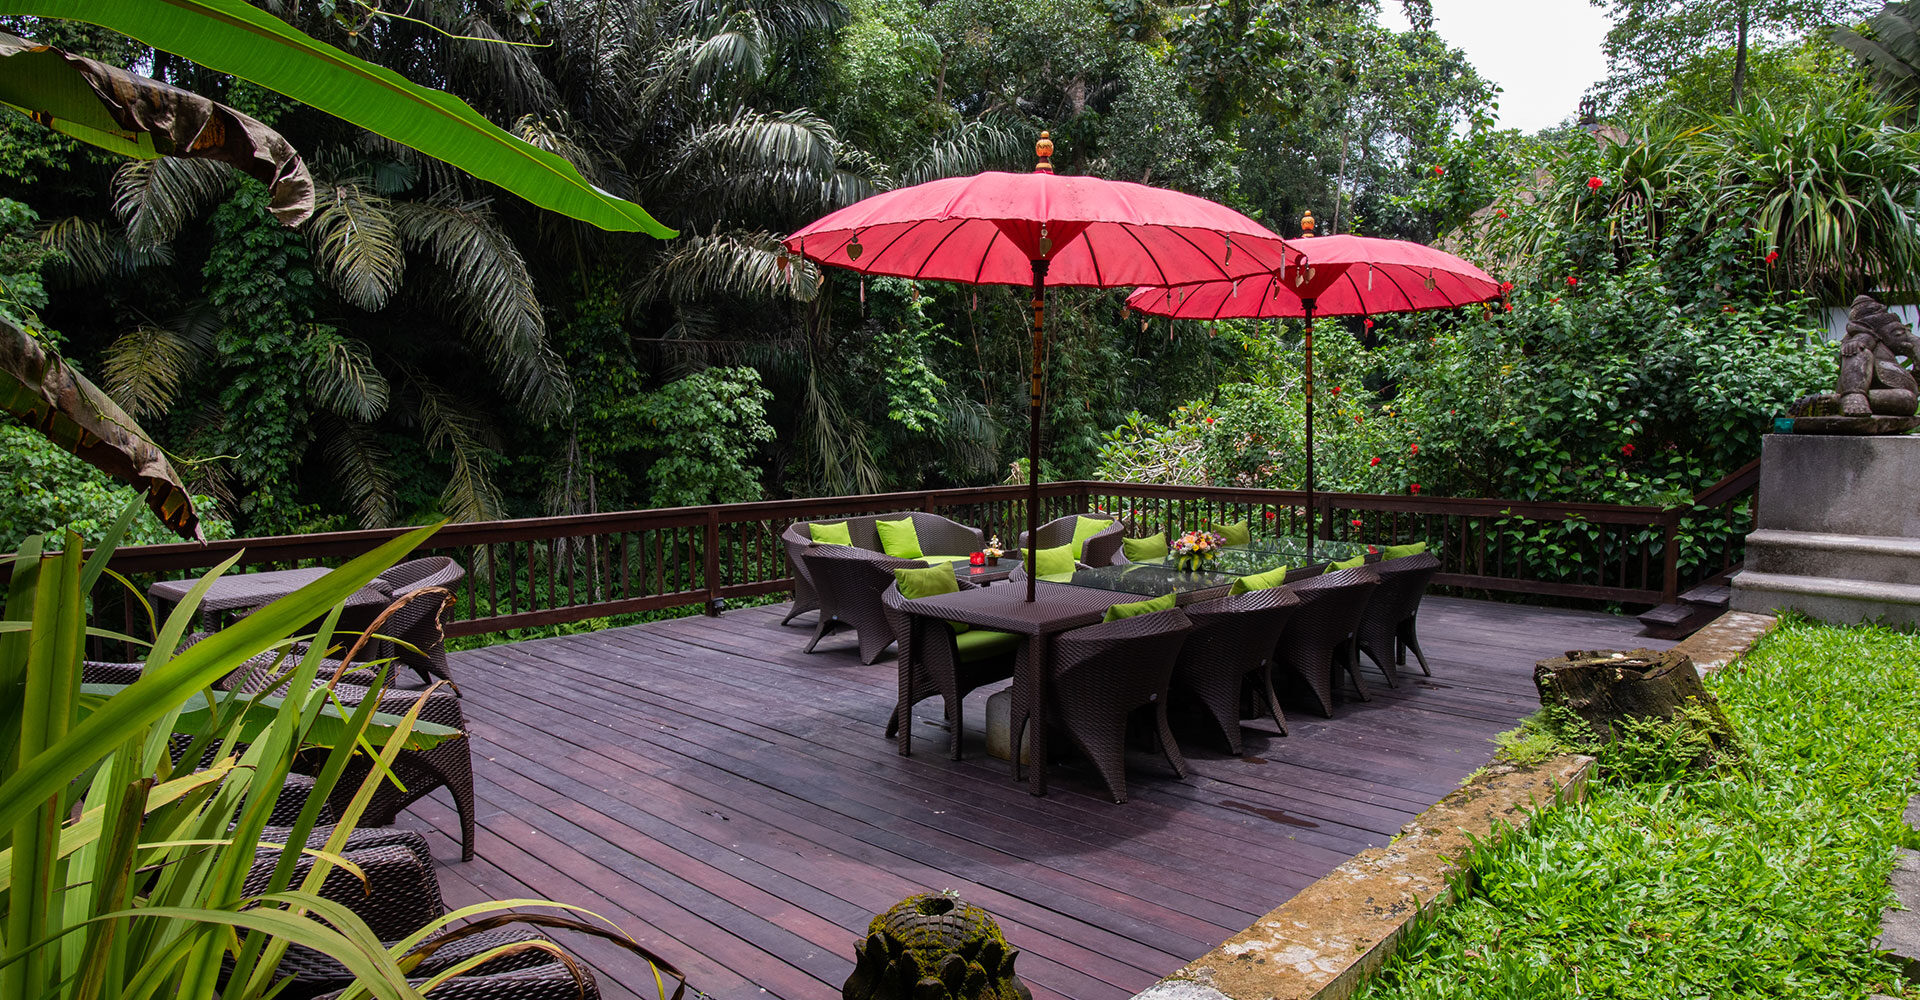 One of the decked seating areas under umbrellas on the estate at Sukhavati Ayurvedic Wellness Retreat in Bali overlooking the rainforest.